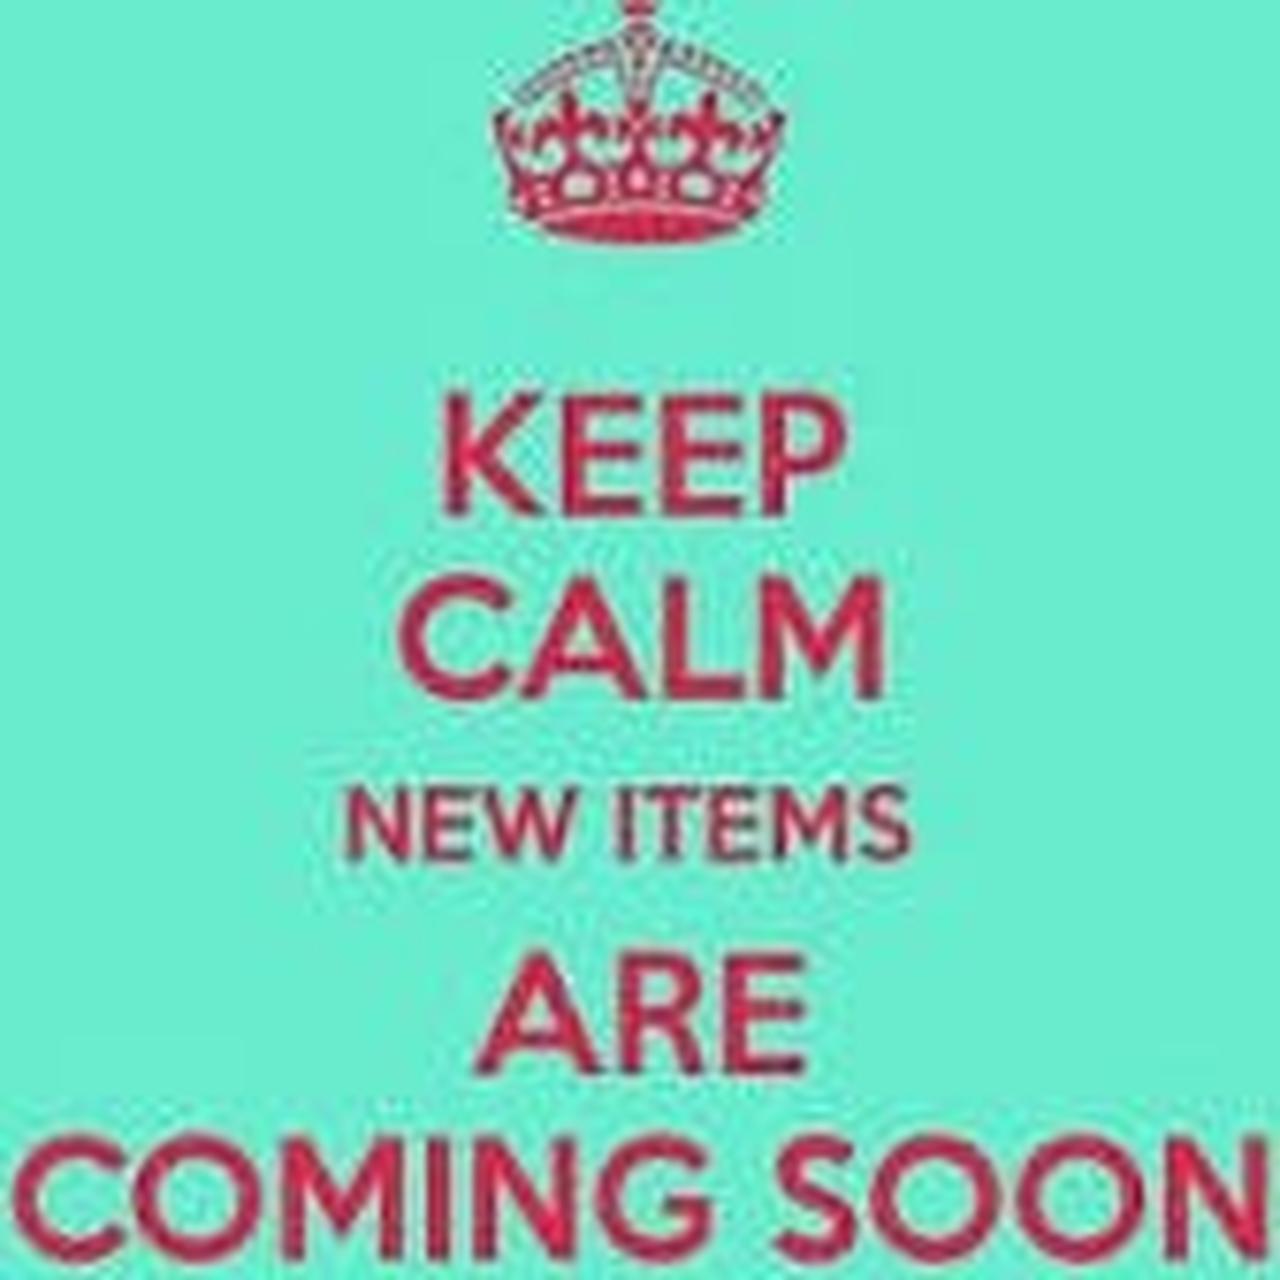 New items coming soon this weekend :)stay tuned and...